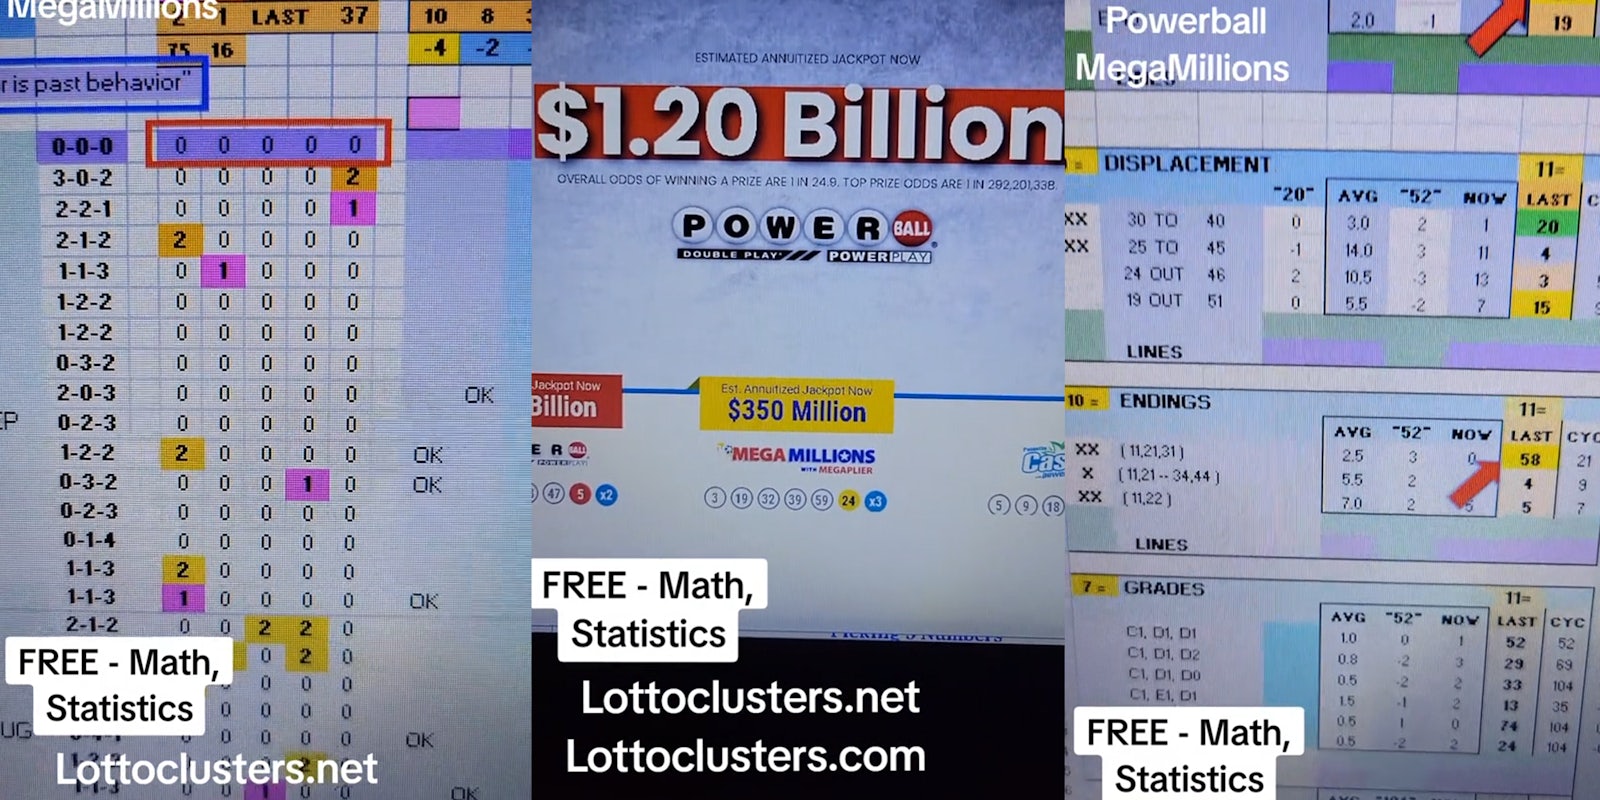 Man claims to share ‘statistics to help you out’ when playing the lottery